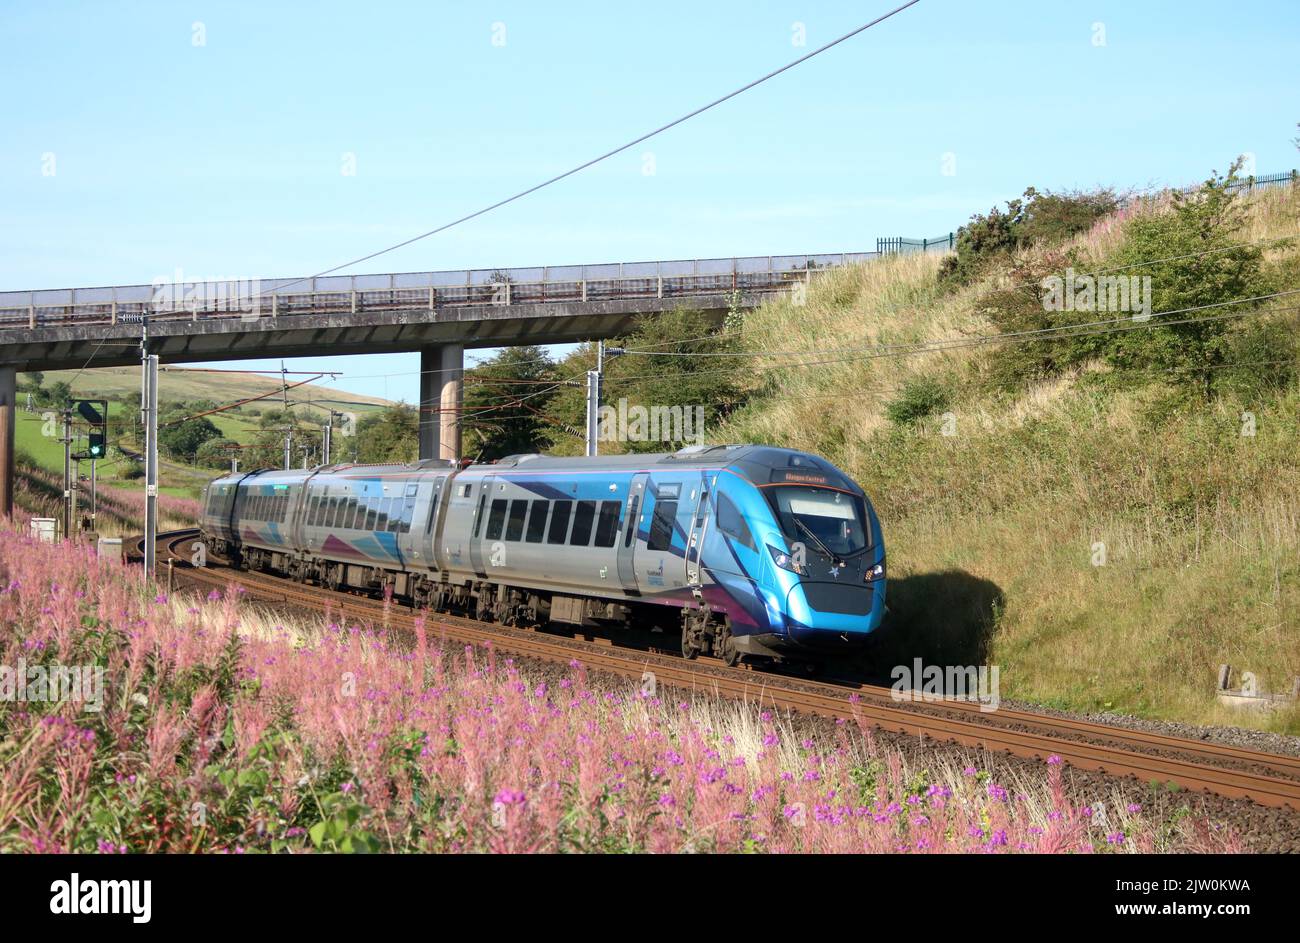 TransPennine Express class 397 Civity Nova 2 electric multiple unit train, 397010, on West Coast Main Line at Lowgill in Cumbria, 2nd September 2022. Stock Photo